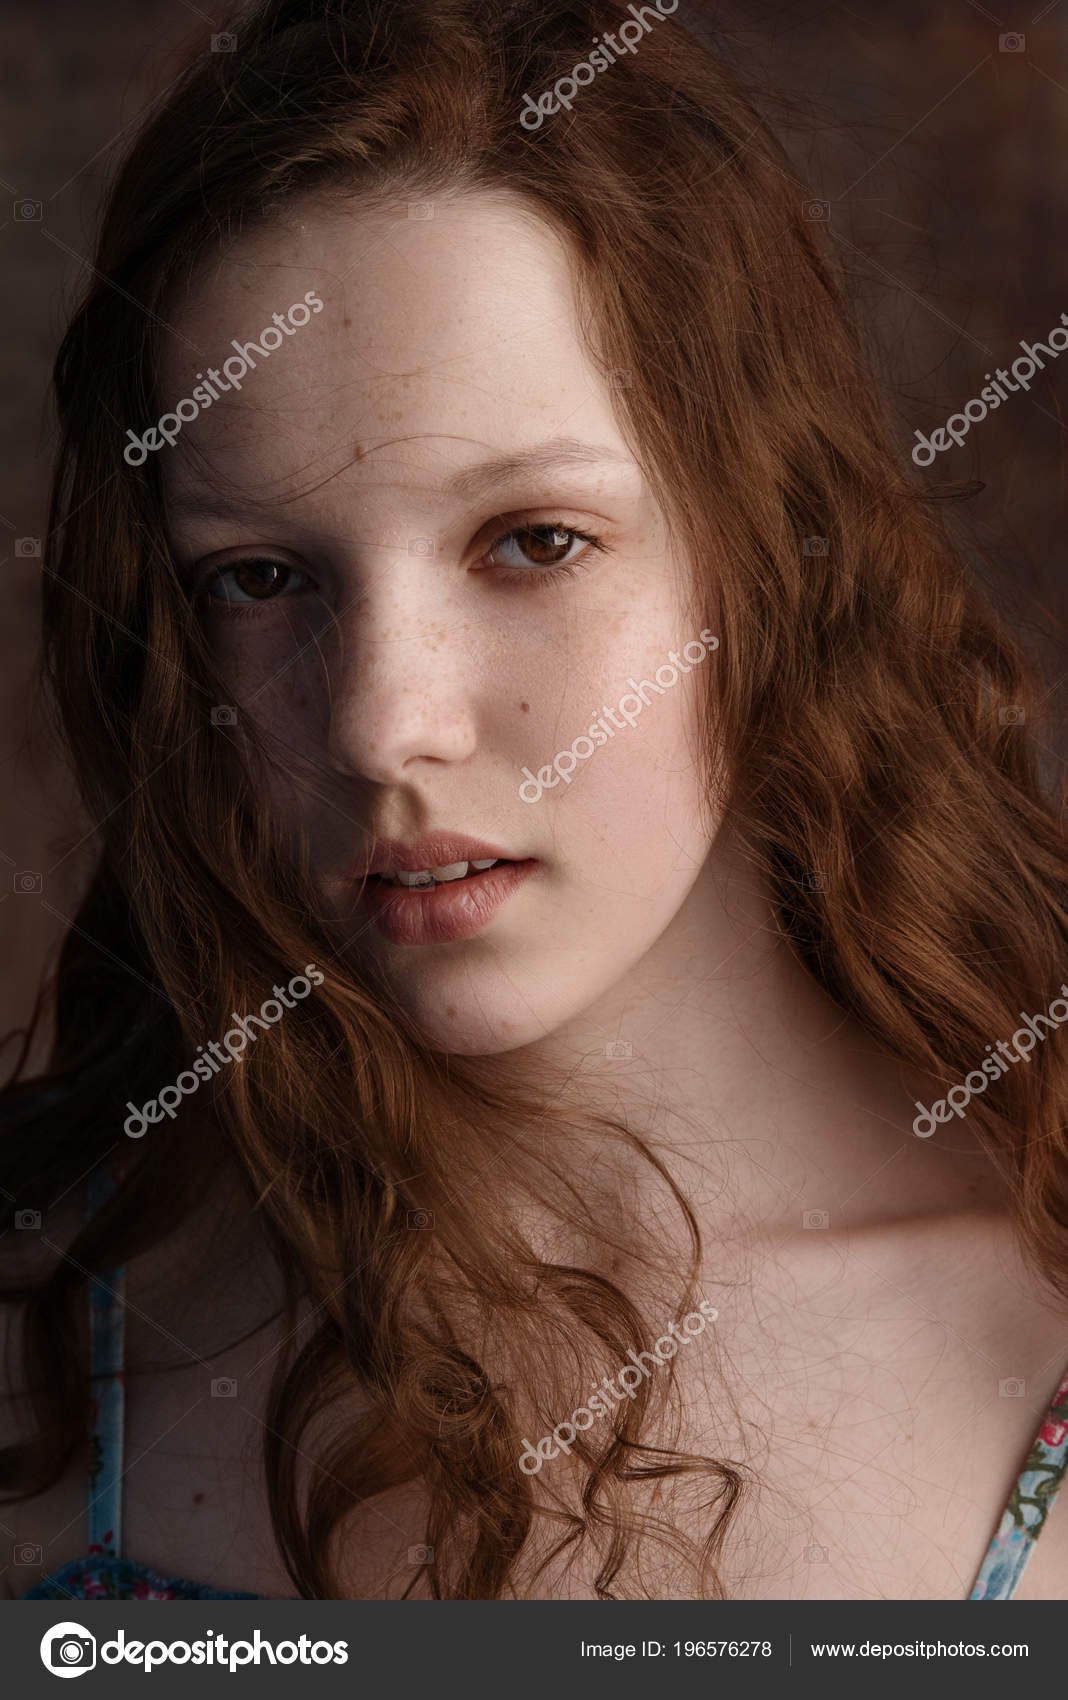 Pictures Cute Teenage Girl Haircuts Dramatic Portrait